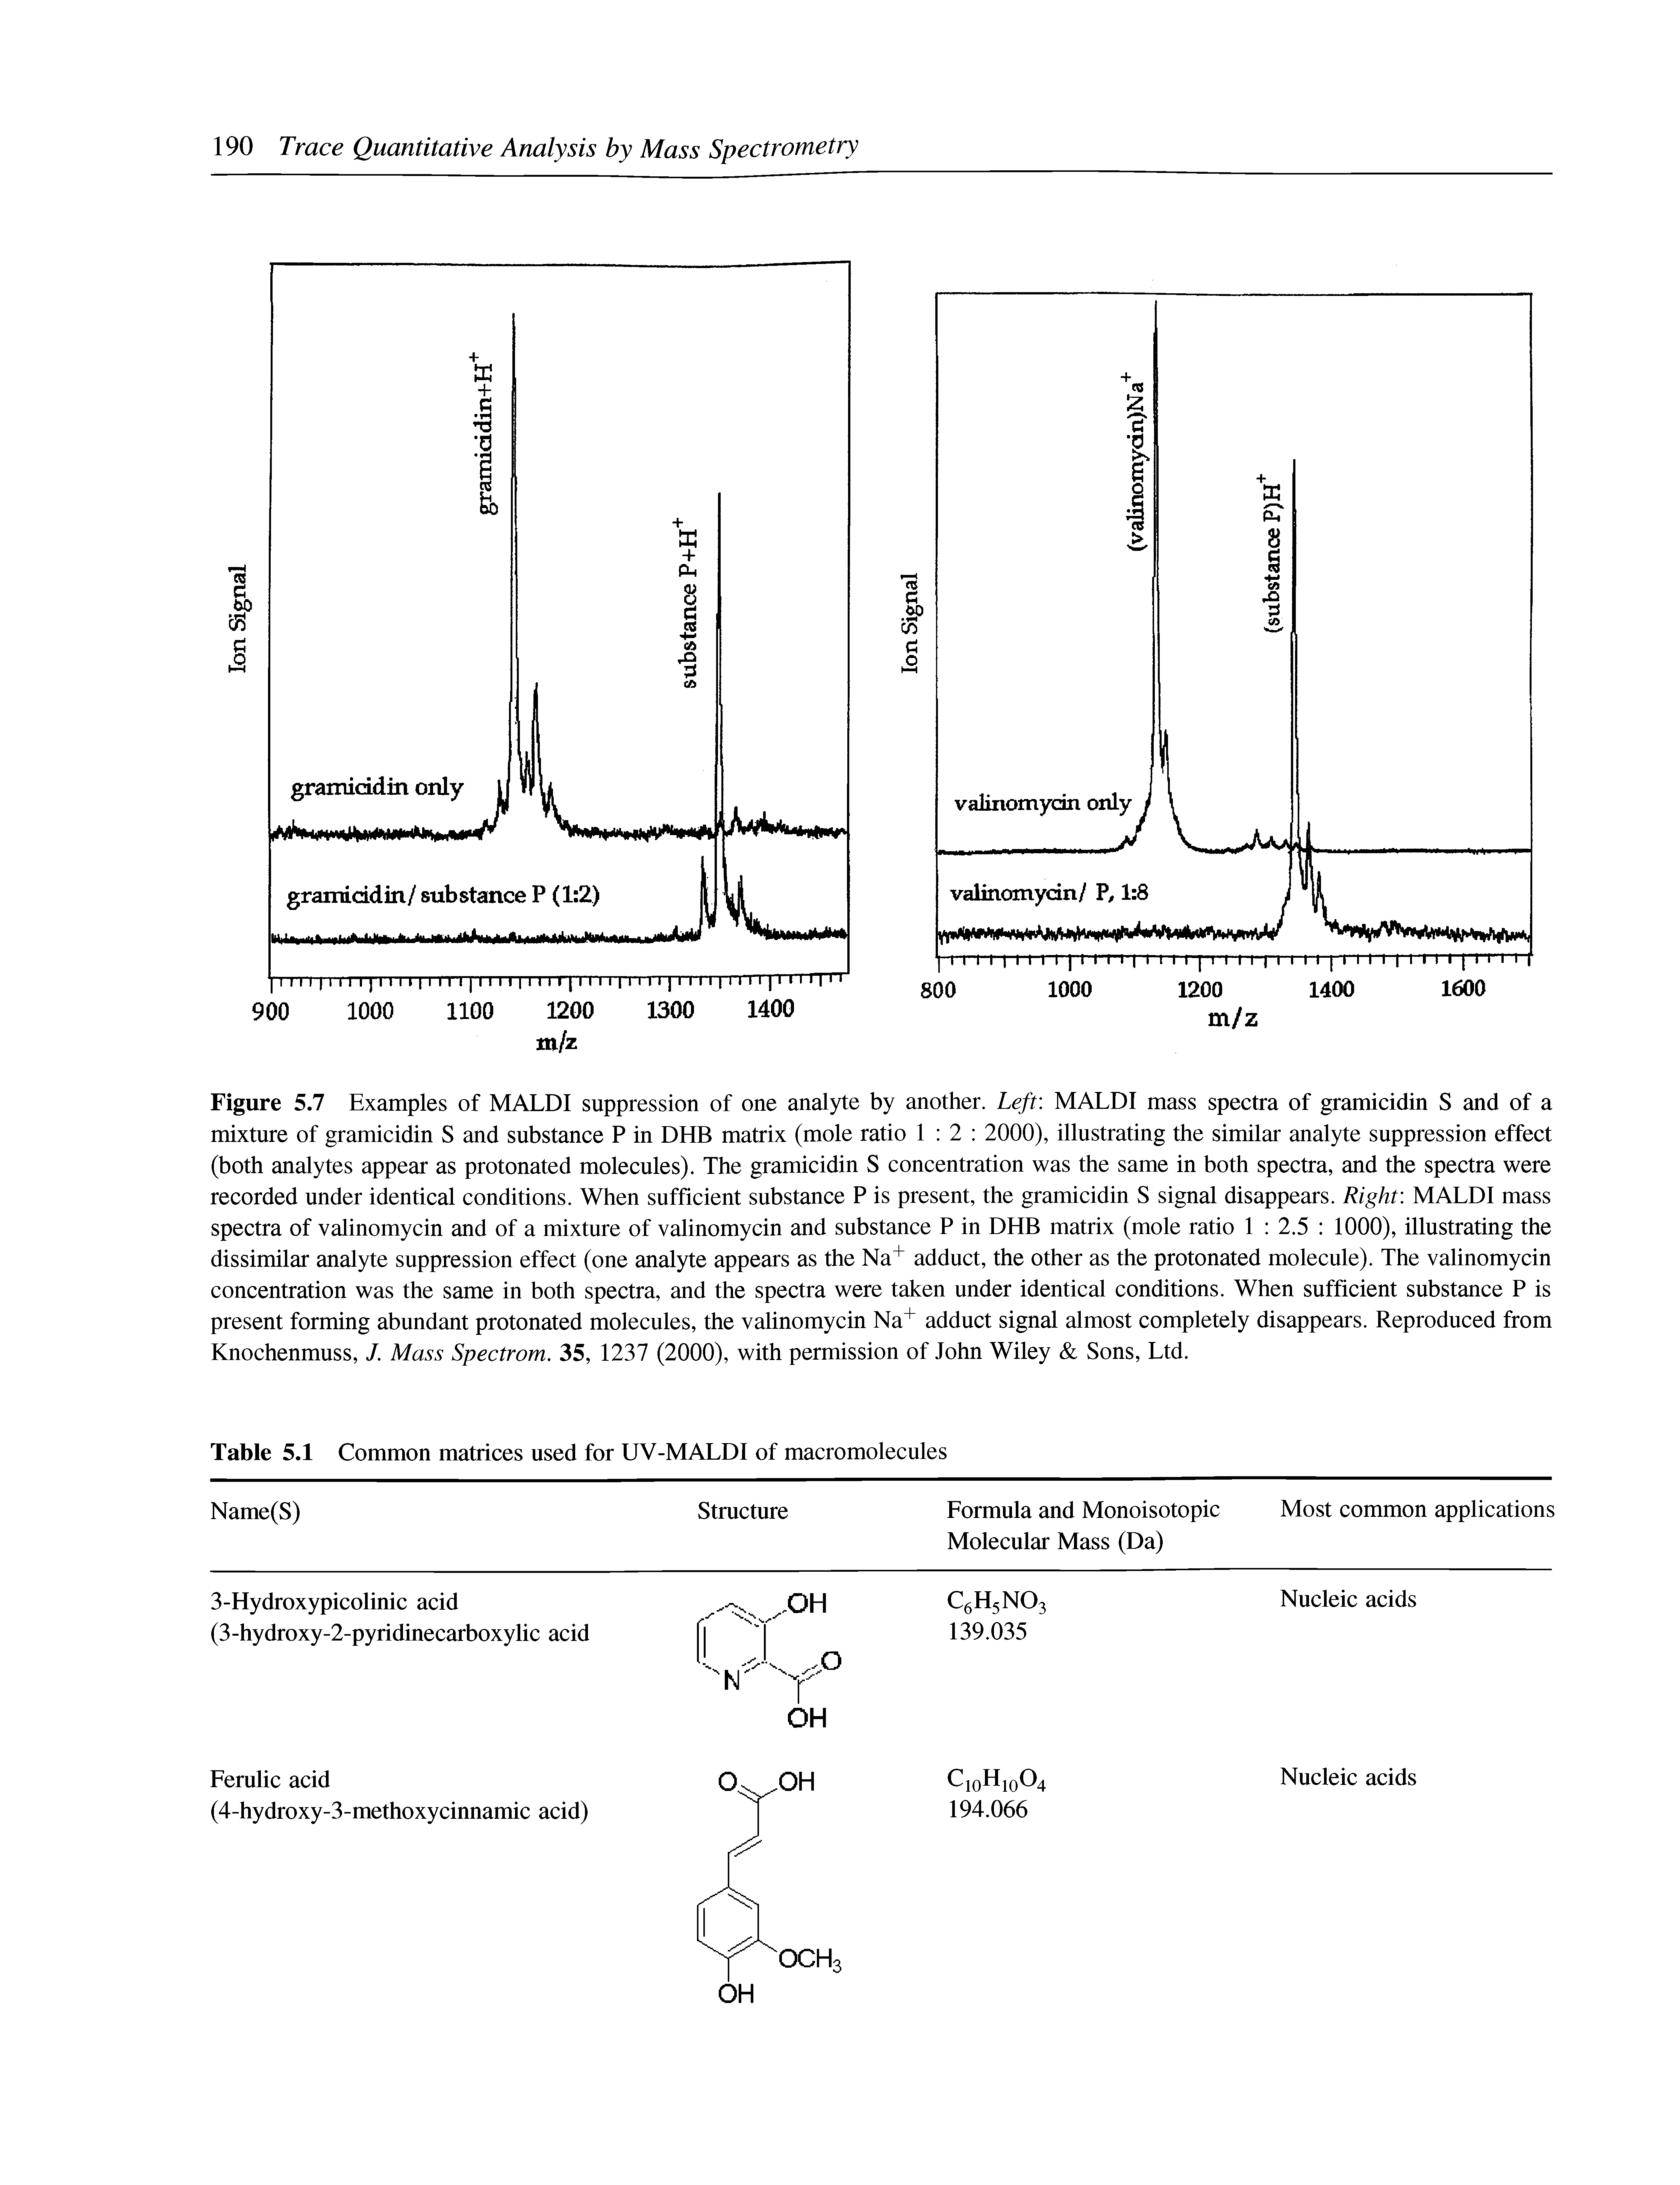 Figure 5.7 Examples of MALDI suppression of one analyte by another. Left MALDI mass spectra of gramicidin S and of a mixture of gramicidin S and substance P in DHB matrix (mole ratio 1 2 2000), illustrating the similar analyte suppression effect (both analytes appear as protonated molecules). The gramicidin S concentration was the same in both spectra, and the spectra were recorded under identical conditions. When sufficient substance P is present, the gramicidin S signal disappears. Right MALDI mass spectra of valinomycin and of a mixture of valinomycin and substance P in DHB matrix (mole ratio 1 2.5 1000), illustrating the dissimilar analyte suppression effect (one analyte appears as the Na adduct, the other as the protonated molecule). The valinomycin concentration was the same in both spectra, and the spectra were taken under identical conditions. When sufficient substance P is present forming abundant protonated molecules, the valinomycin Na adduct signal almost completely disappears. Reproduced from Knochenmuss, /. Mass Spectrom. 35, 1237 (2000), with permission of John Wiley Sons, Ltd.